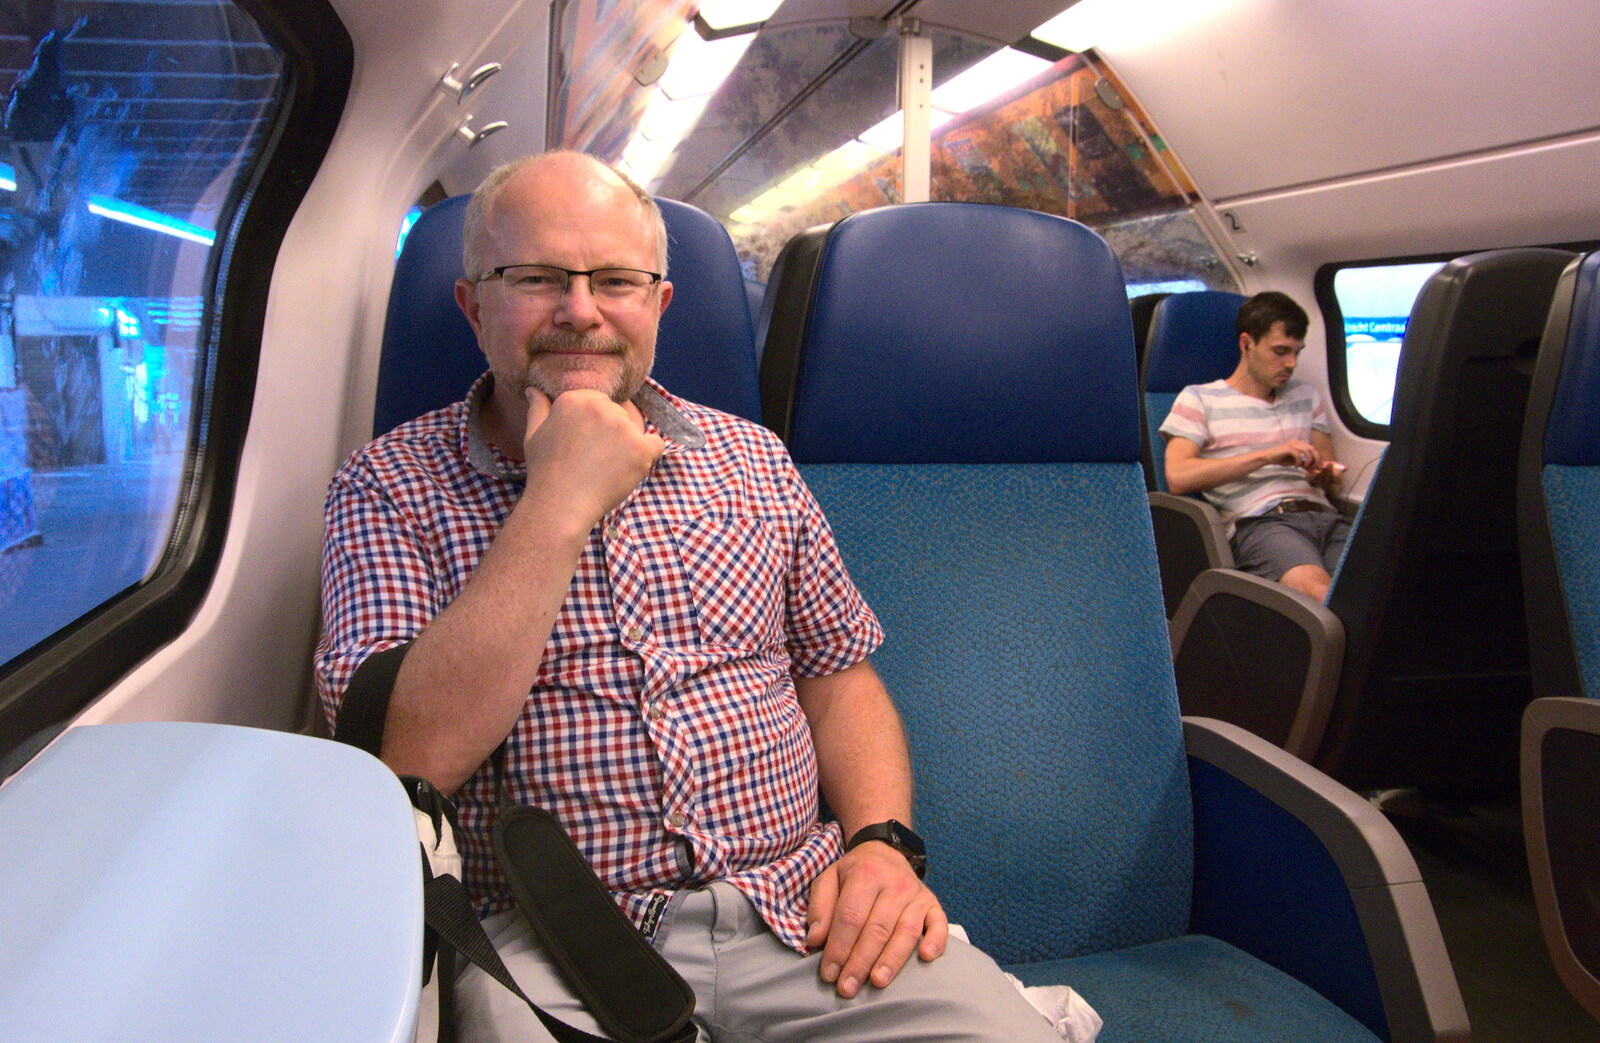 Hamish on the train from A Postcard from Utrecht, Nederlands - 10th June 2018